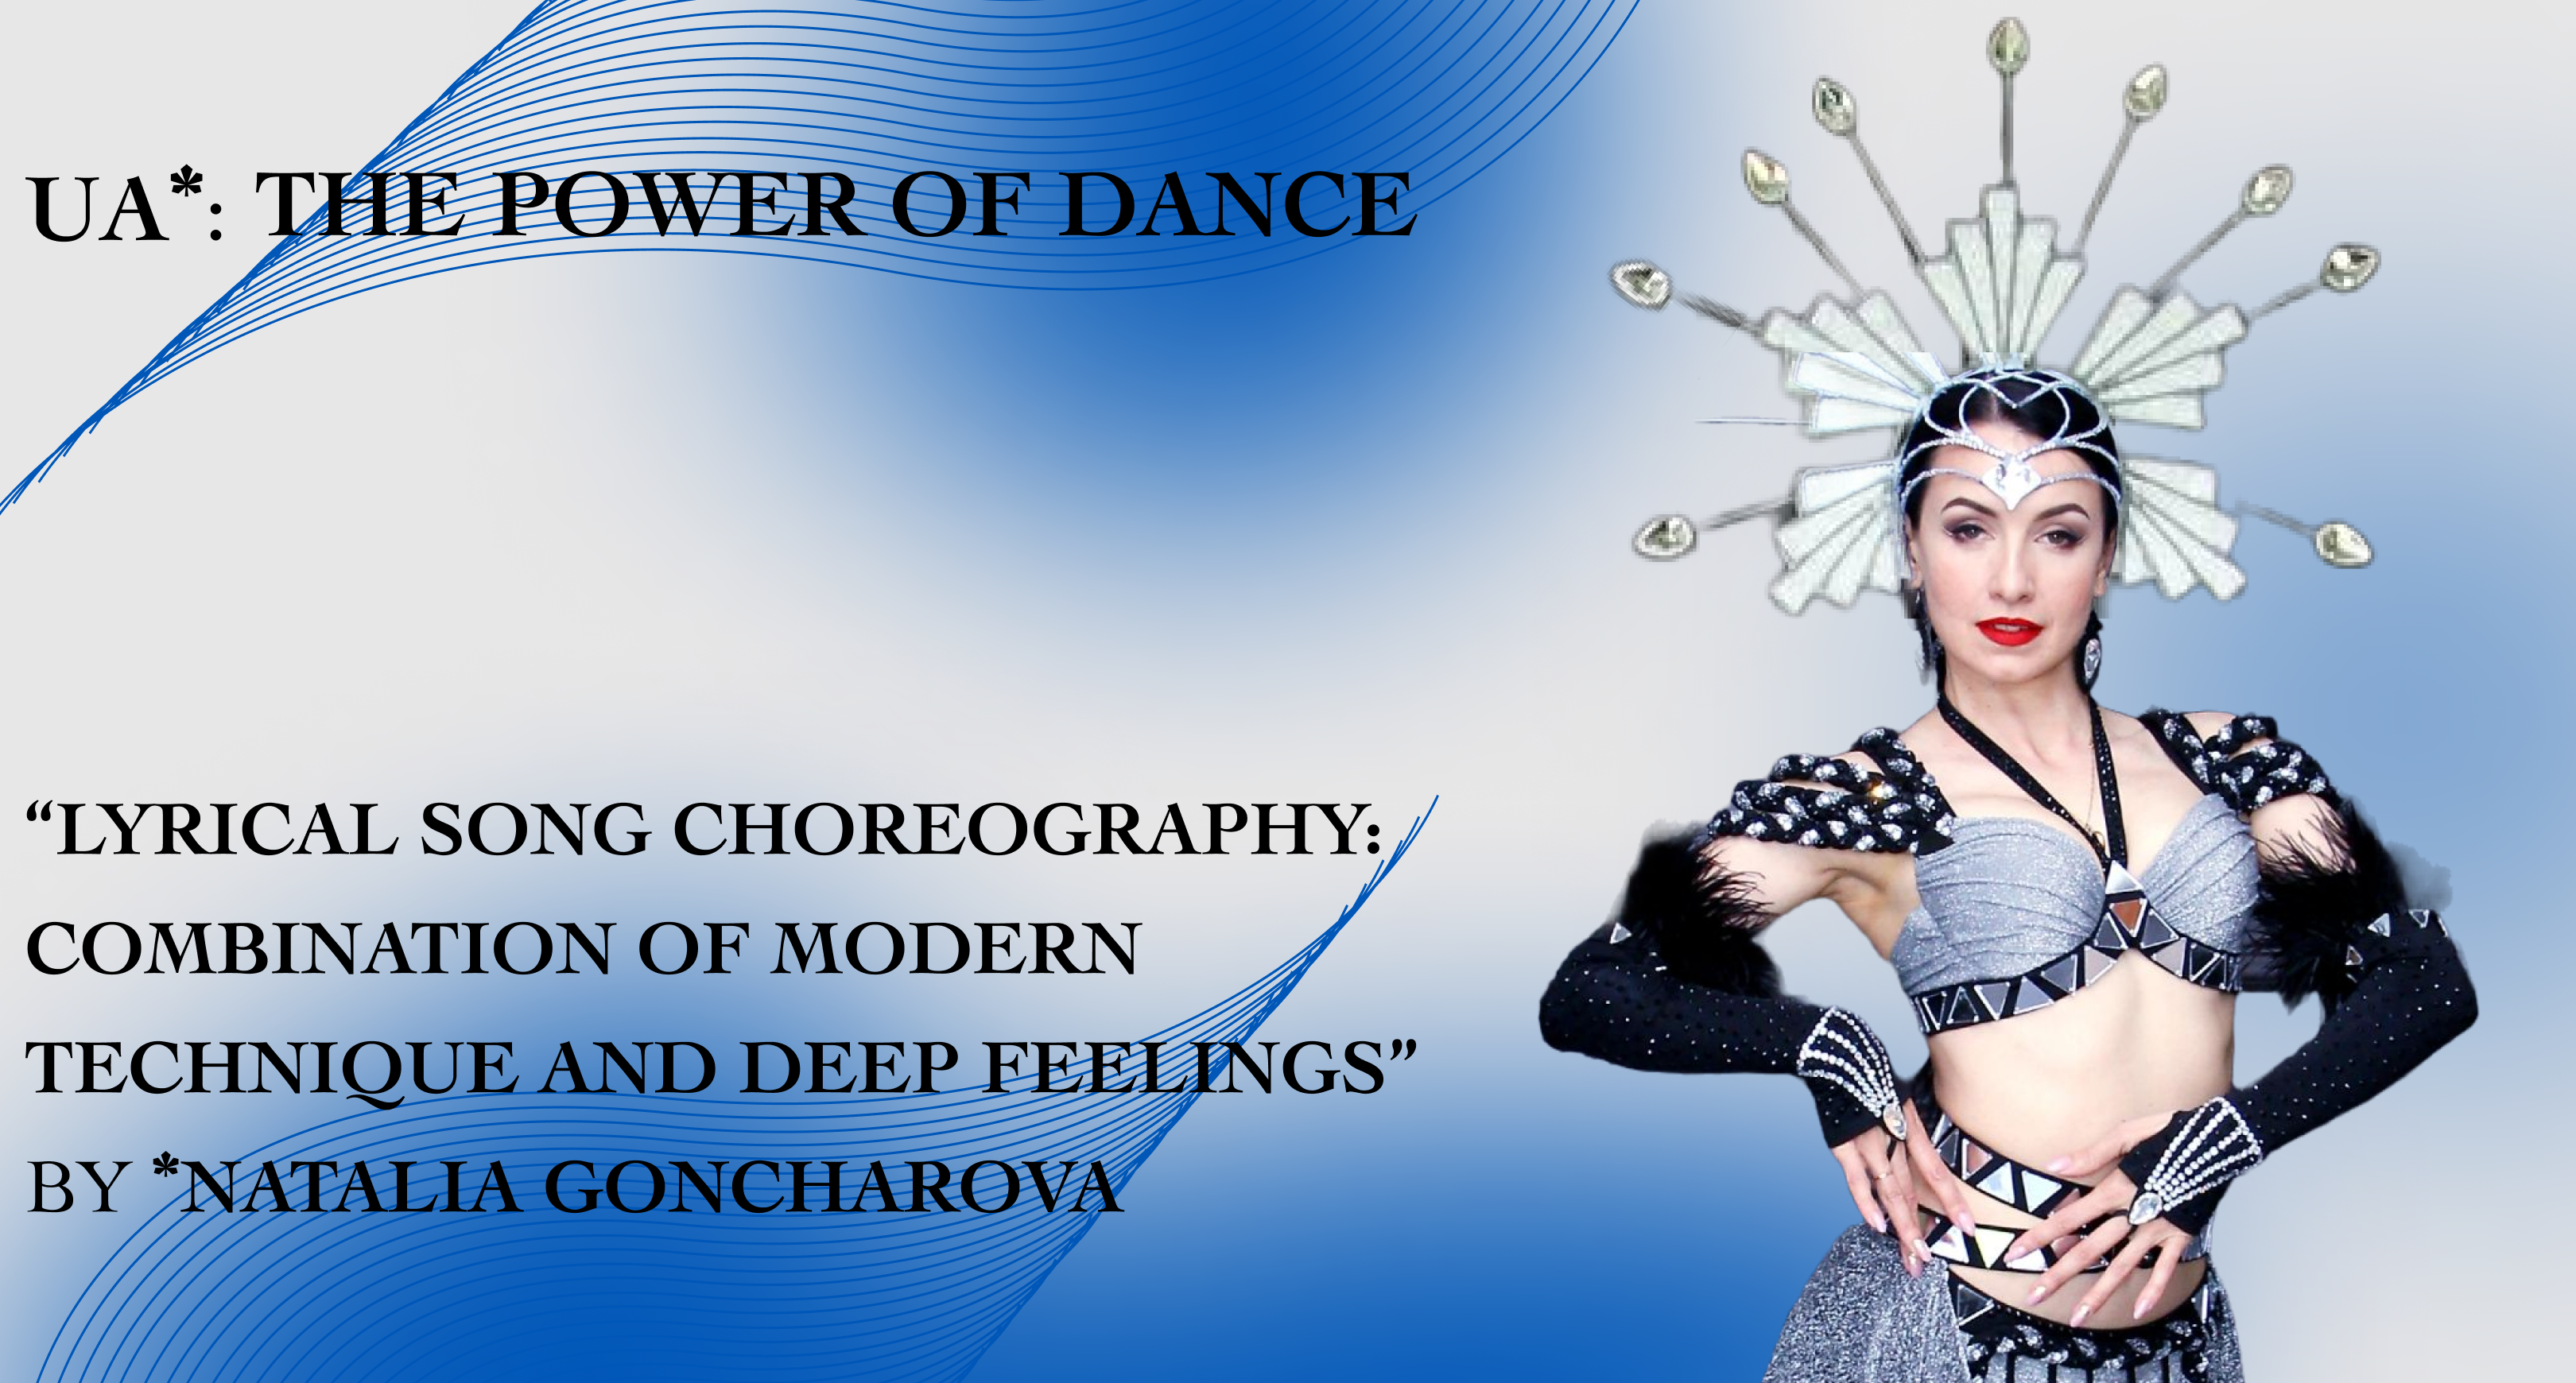 UA*: THE POWER OF DANCE: “Lyrical song choreography: combination of modern technique and deep feelings” by Natalia Goncharova